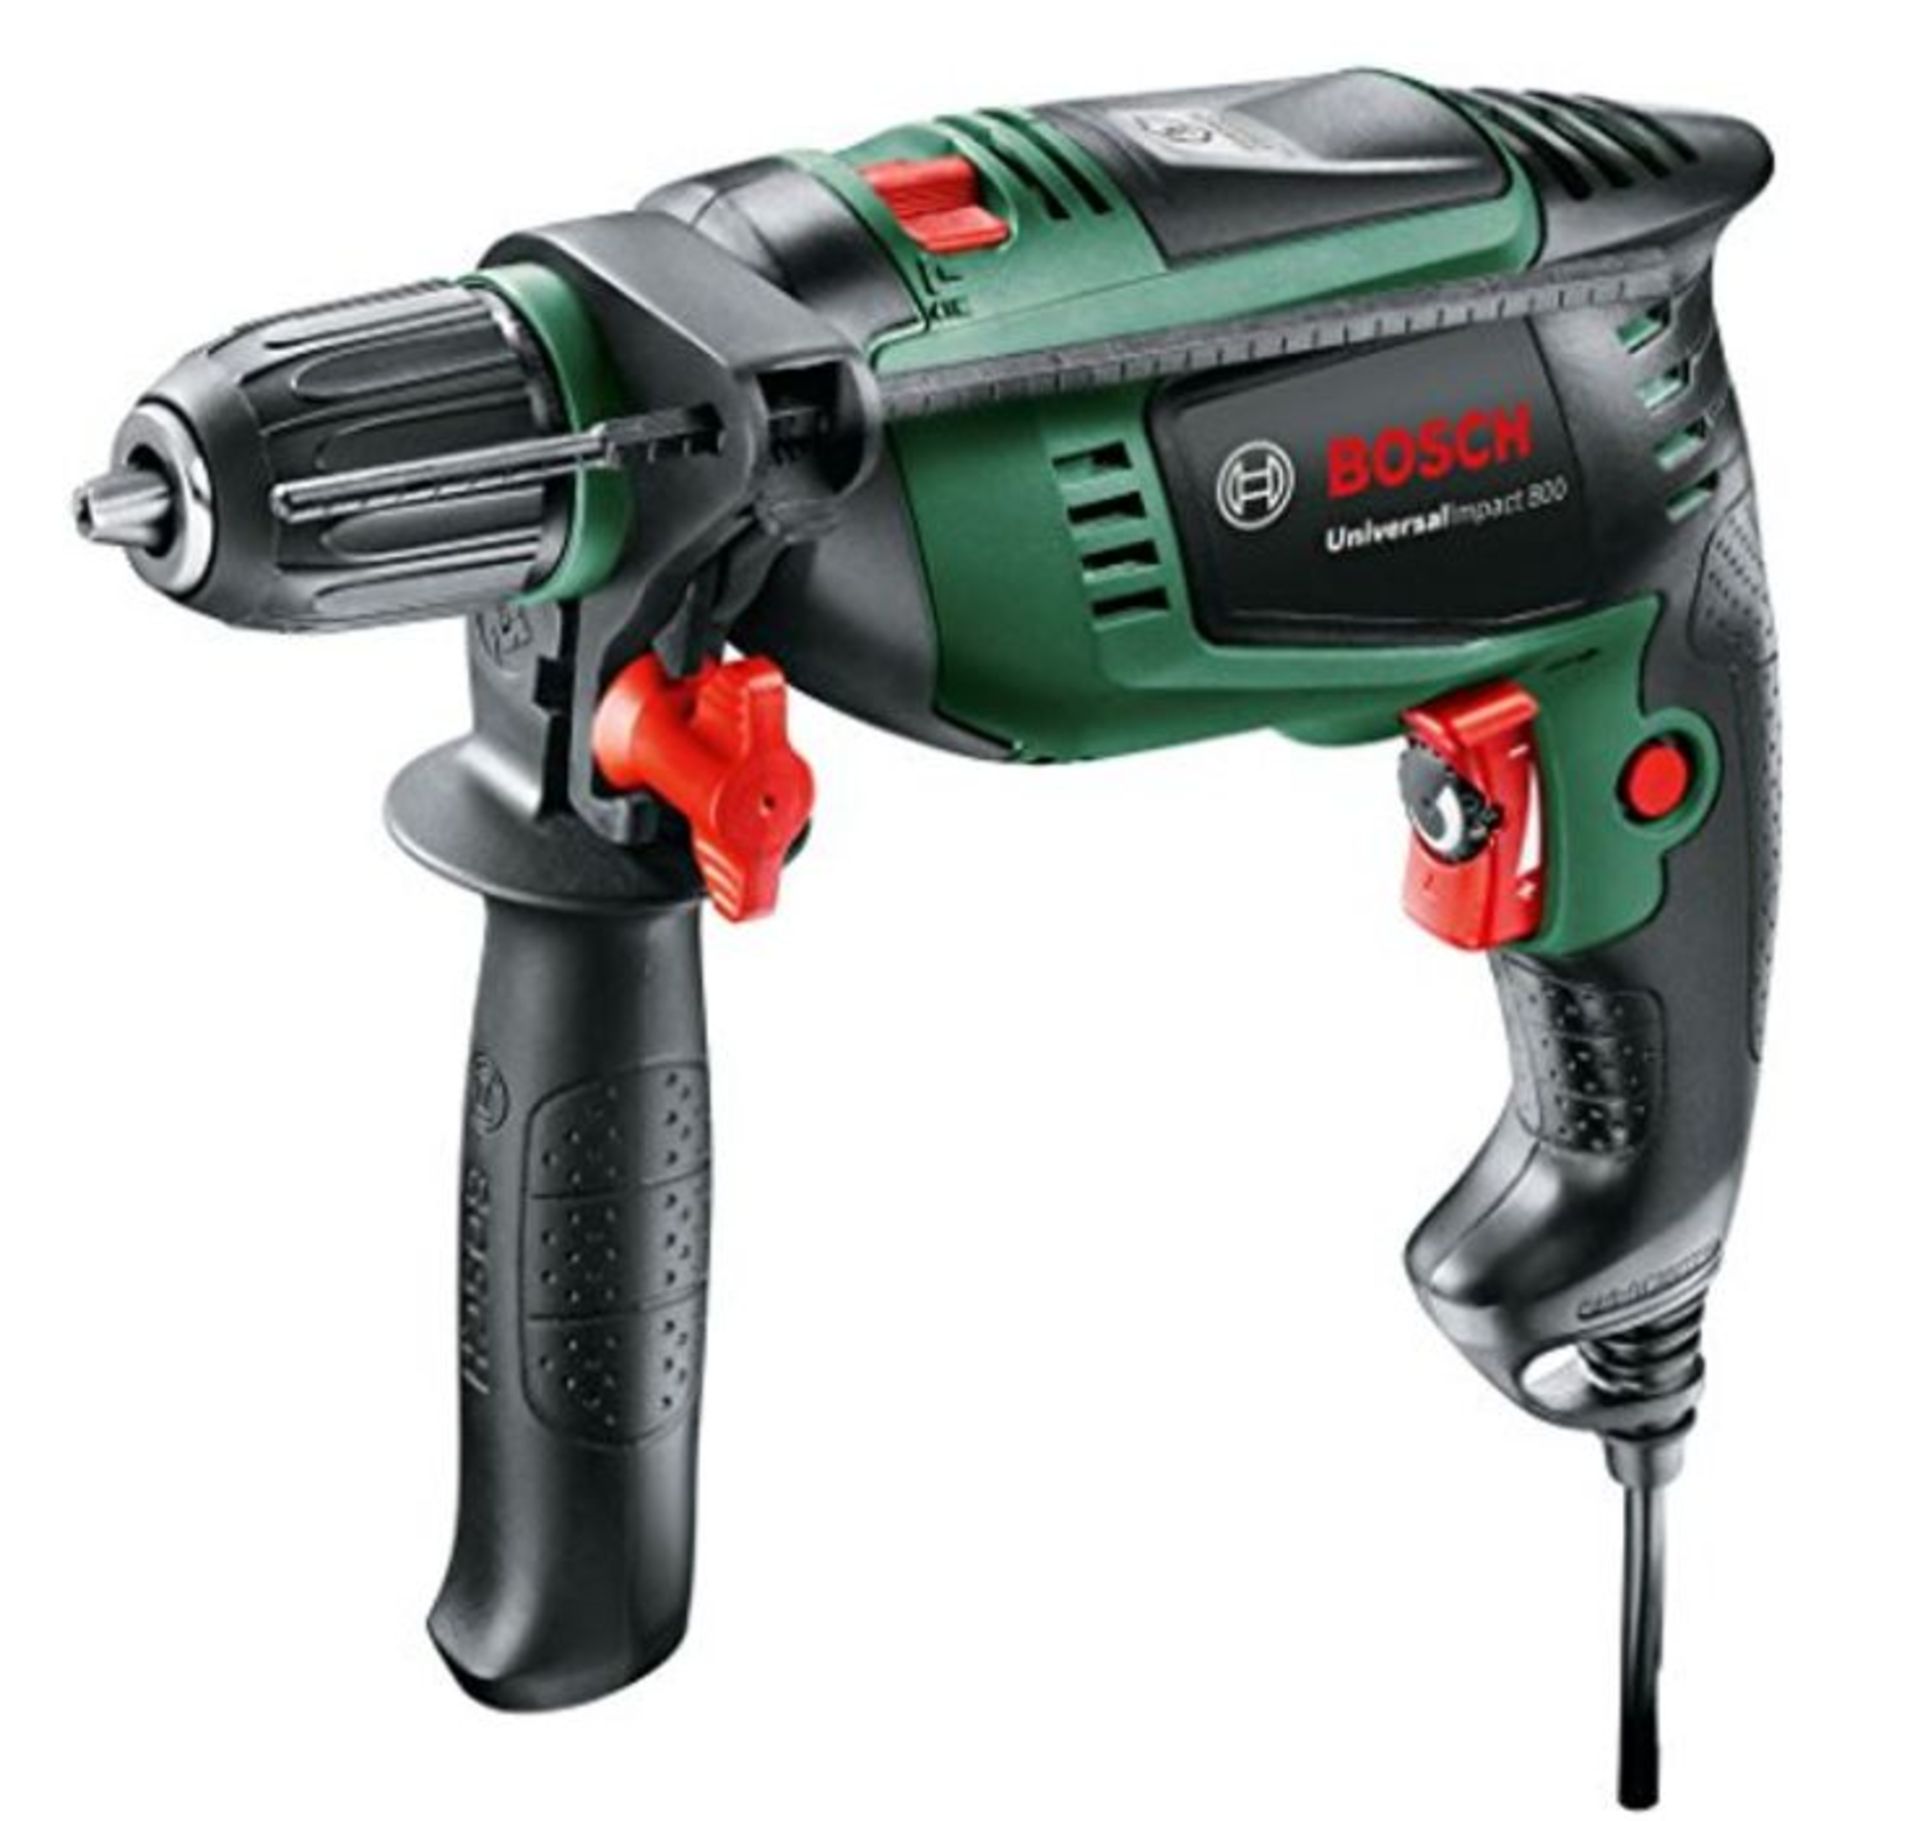 RRP £74.00 Bosch Home and Garden UniversalImpact 800 1-Gang-Schlagbohrmaschine 800 W incl. suitca